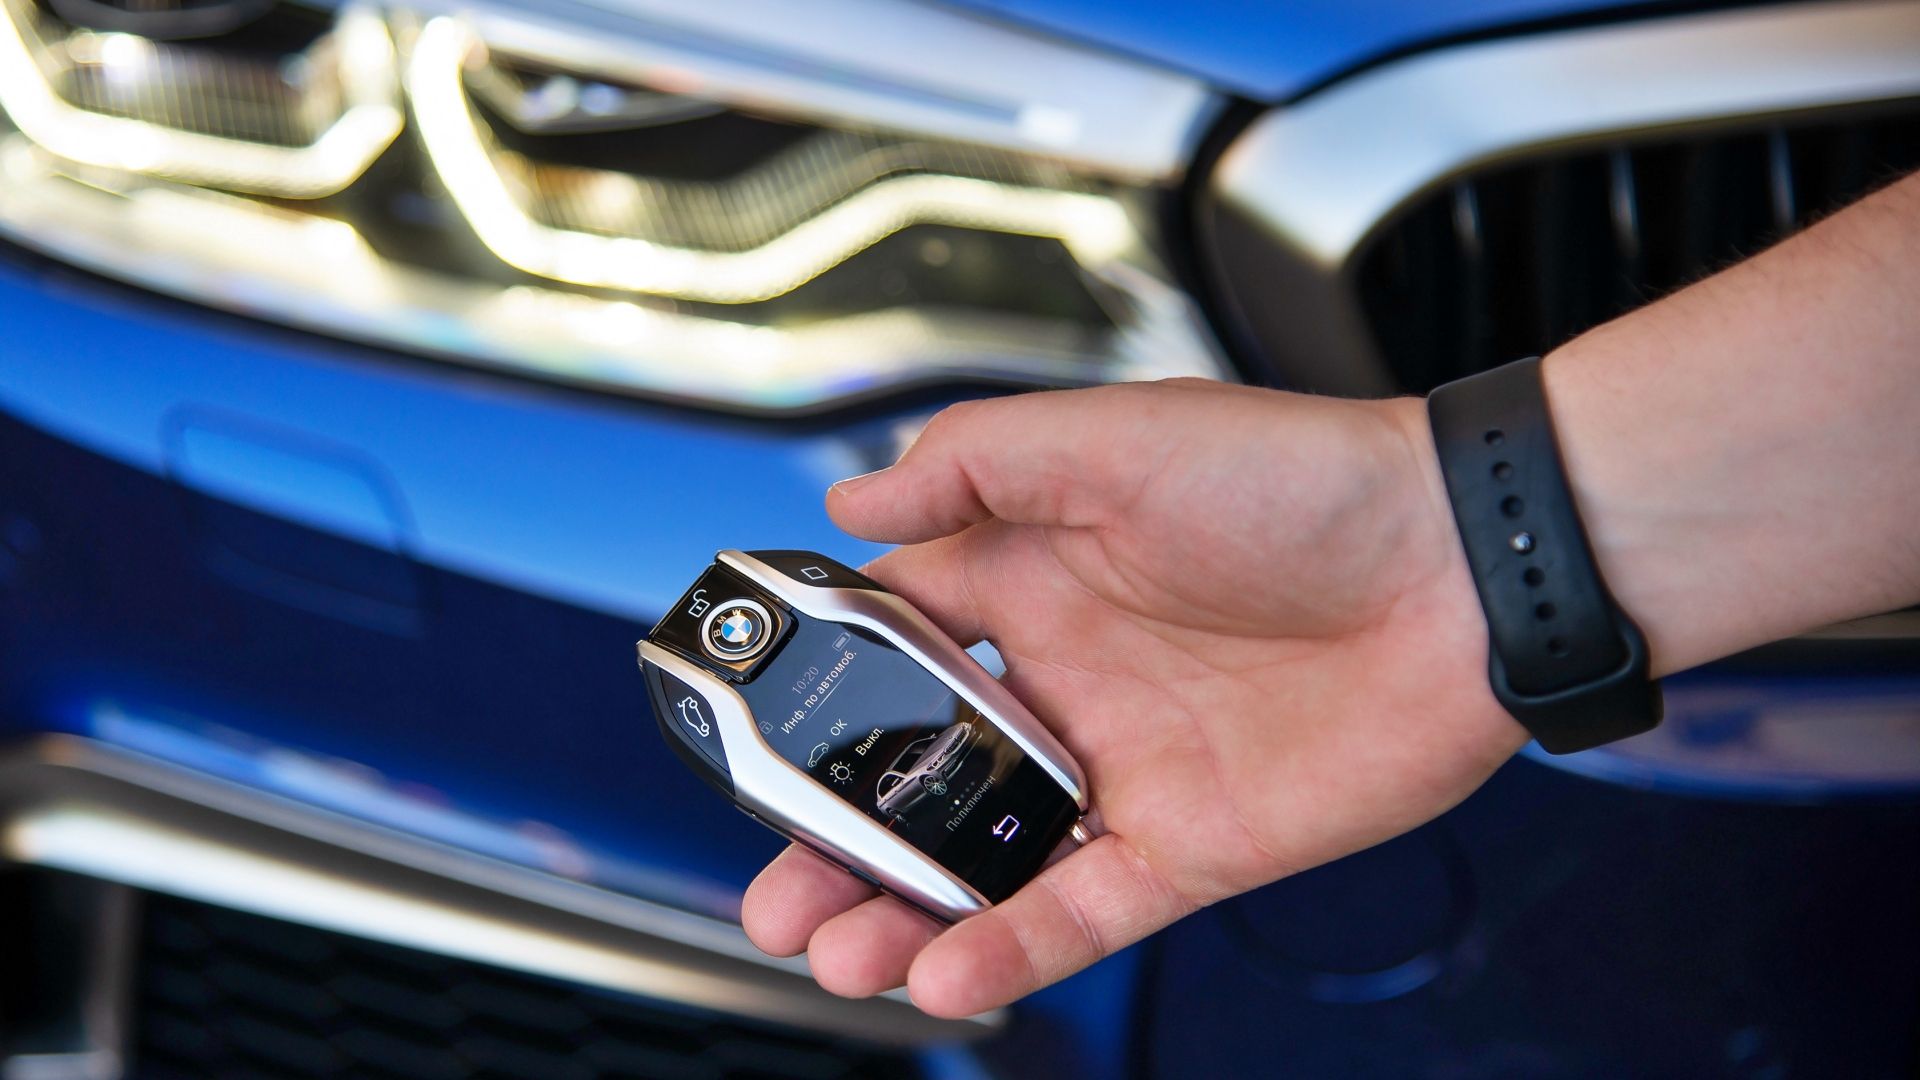 15 Hidden Features Your Car's Key Fob Might Have That You Don't Know About